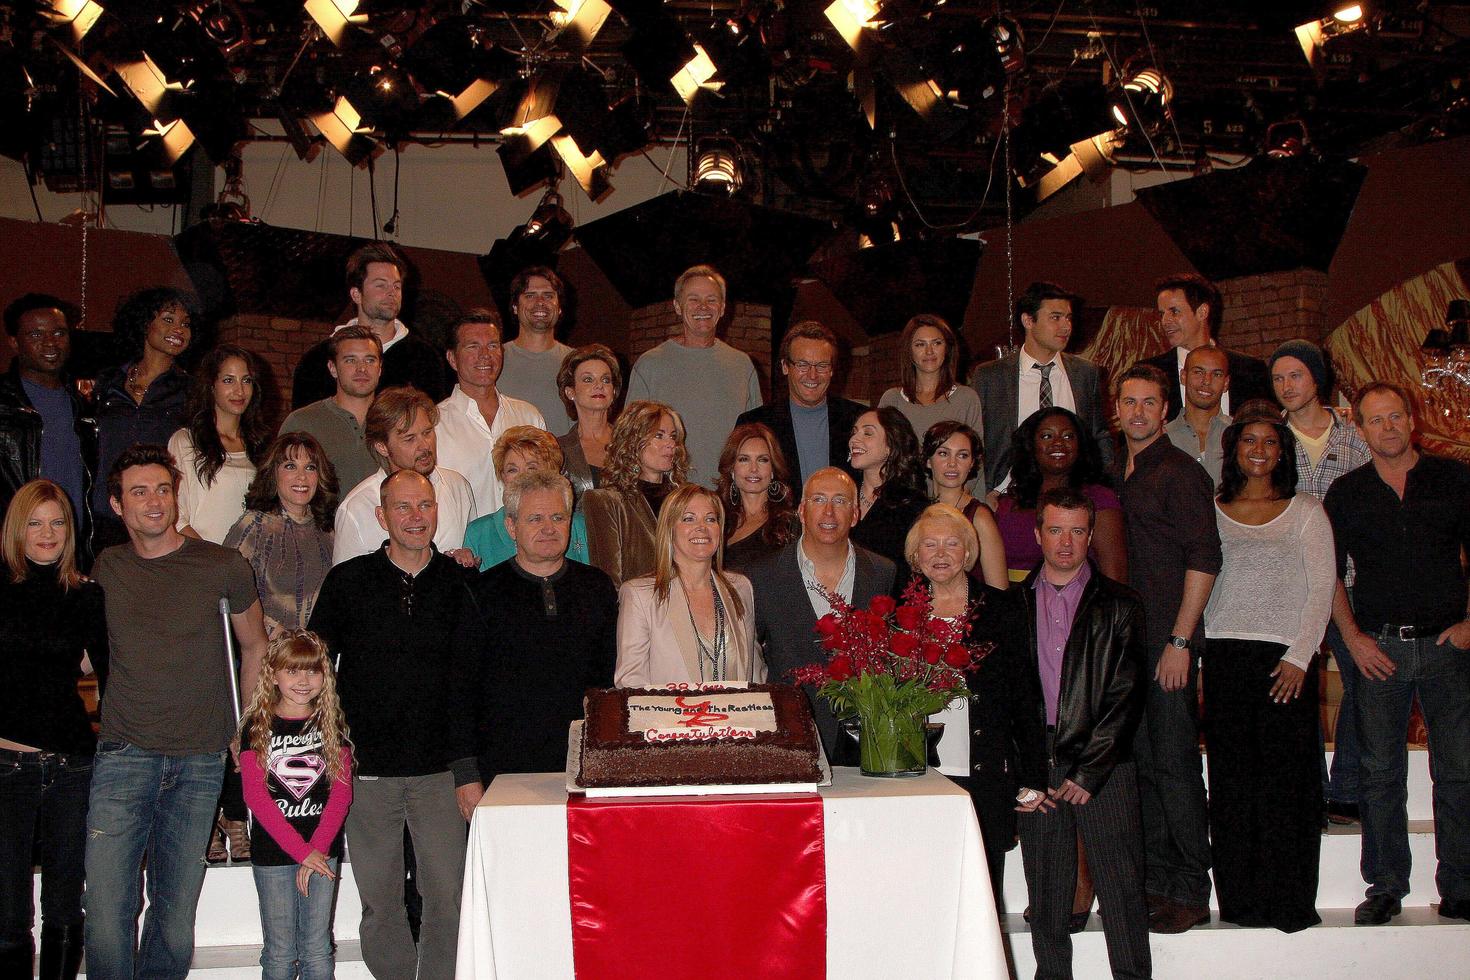 LOS ANGELES, MAR 24 - Young and Restless Cast , producers at the Young and Restless 38th Anniversary On Set Press Party at CBS Television City on March 24, 2011 in Los Angeles, CA photo